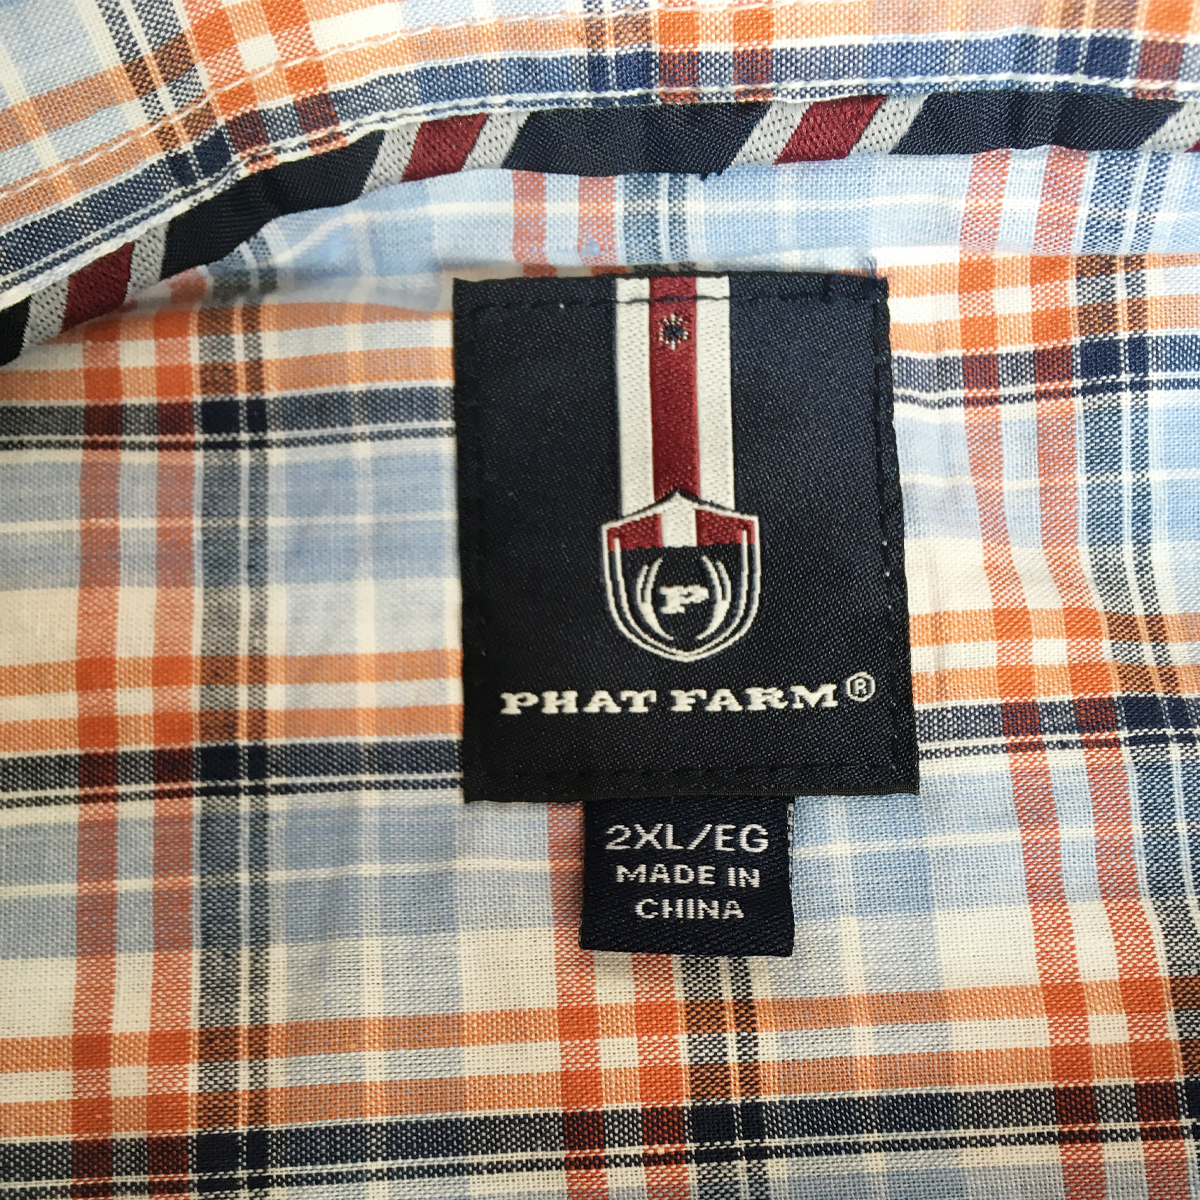 Phat Farm navy blue and red checker print 3